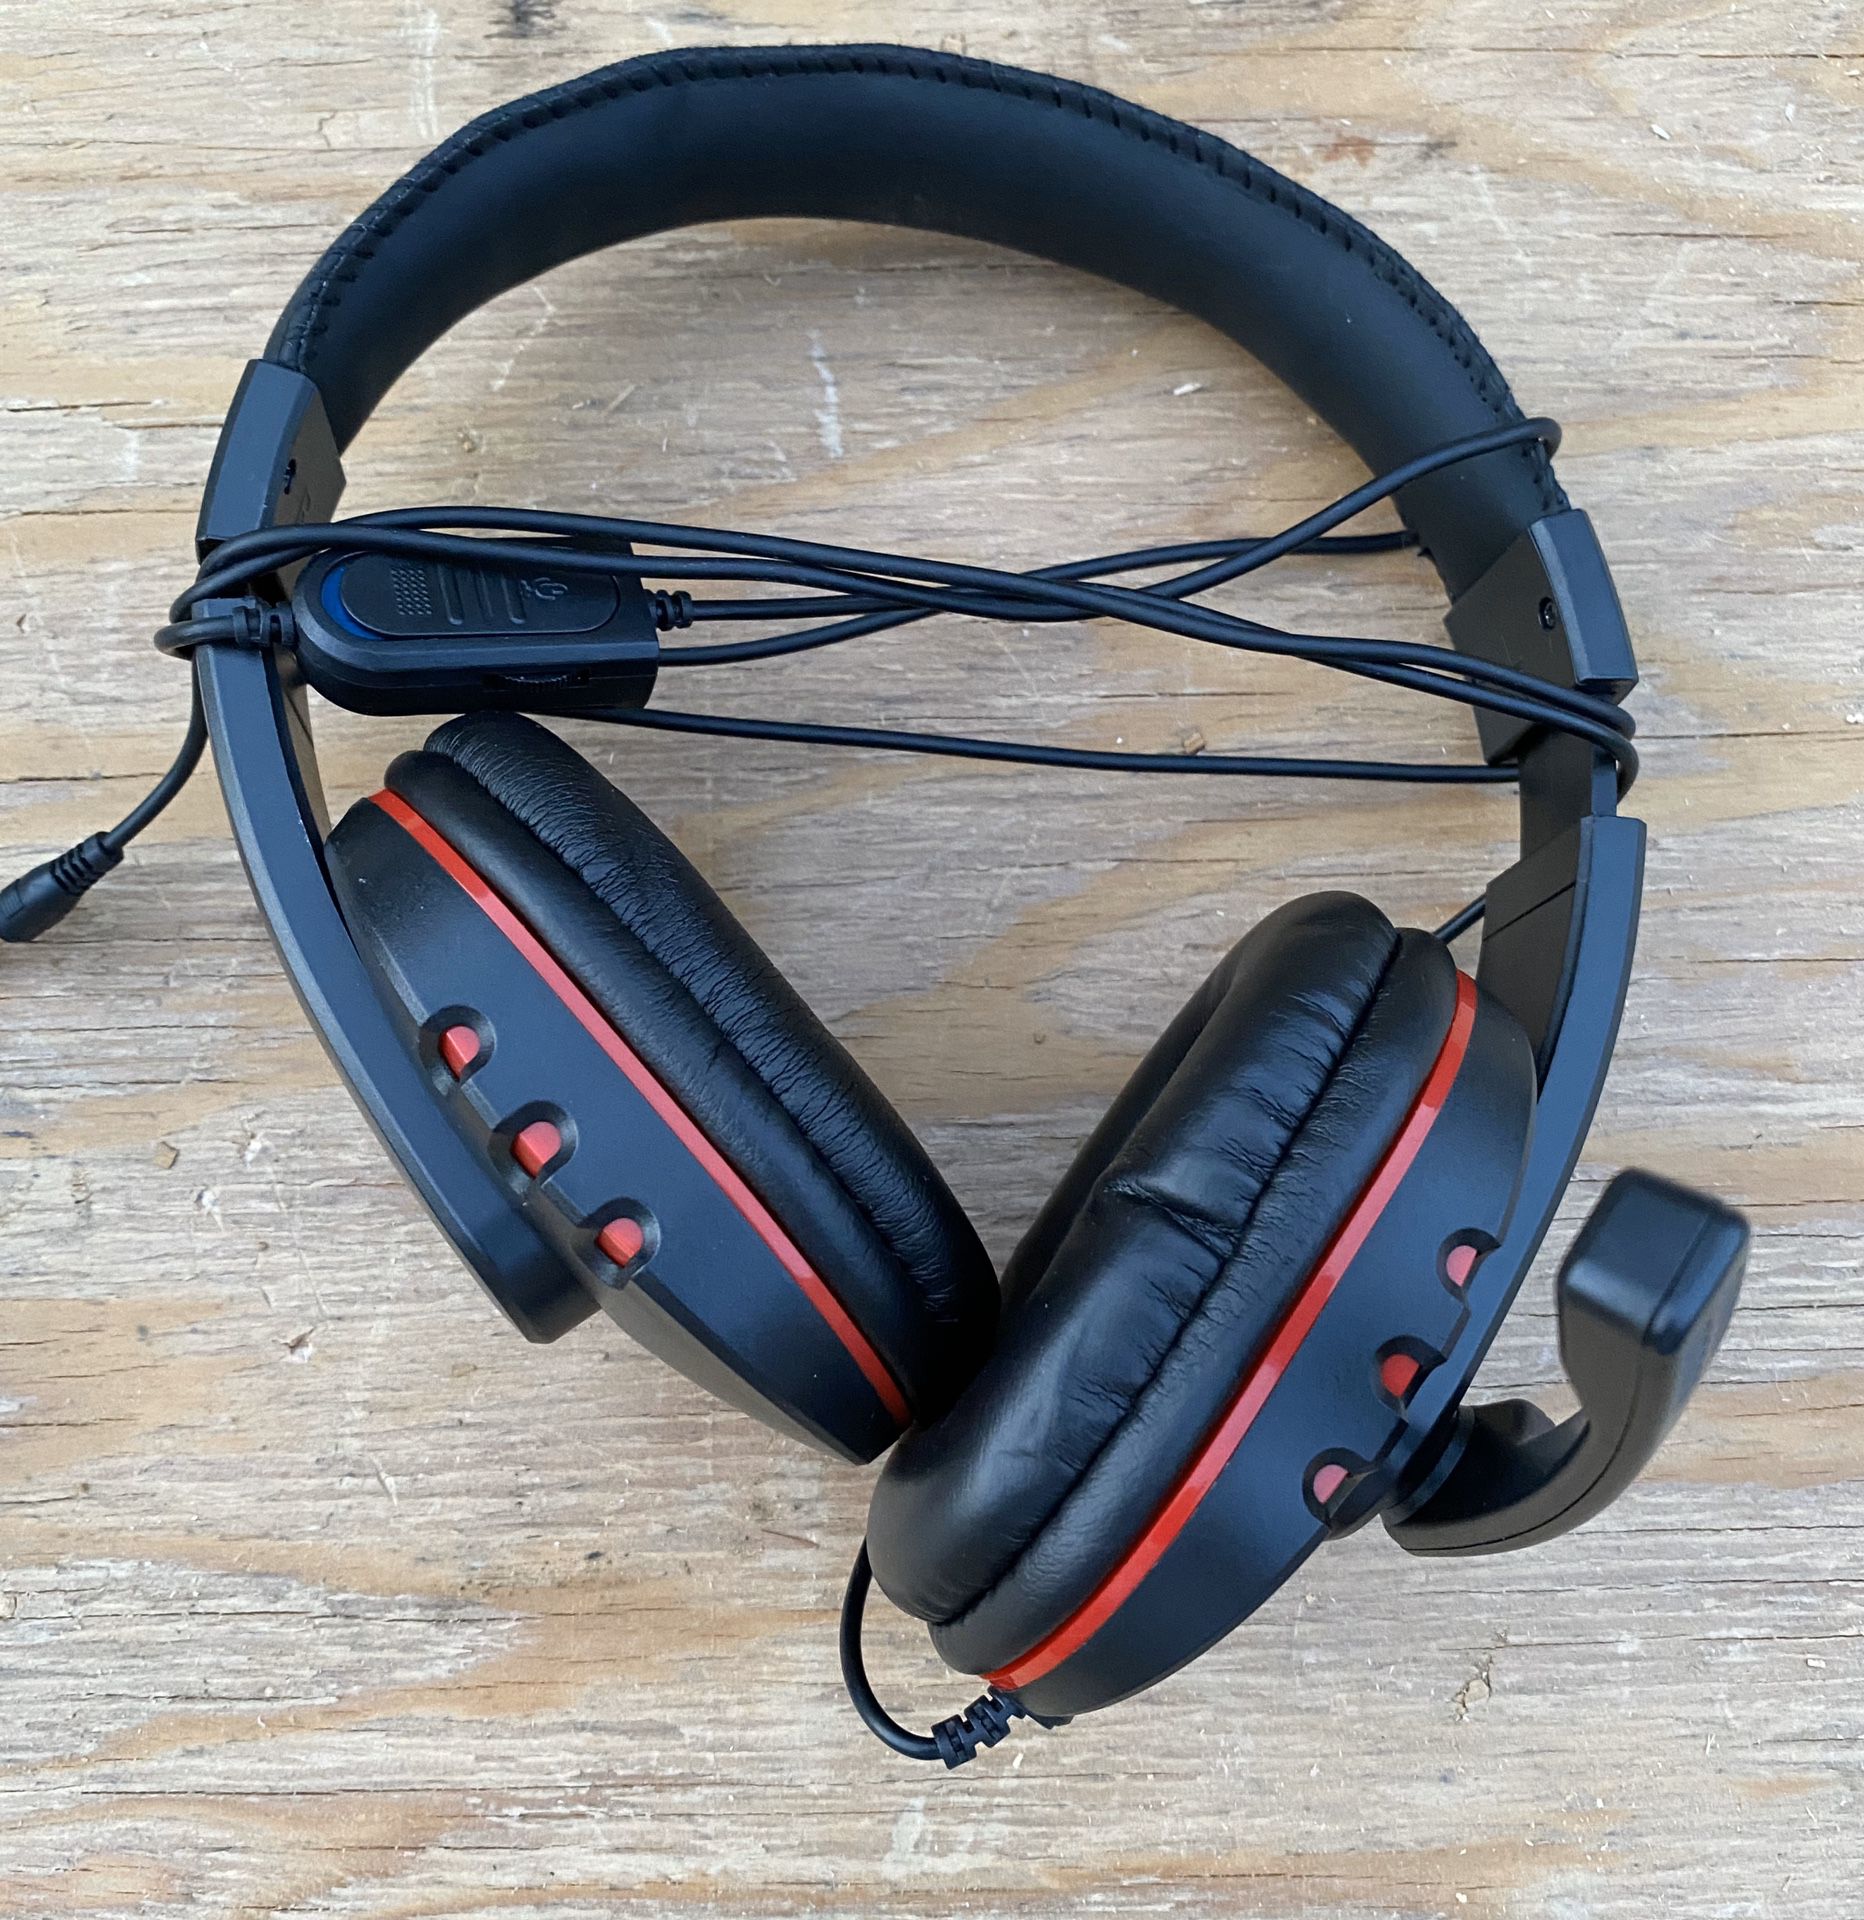 Work from home gaming headsets only $8